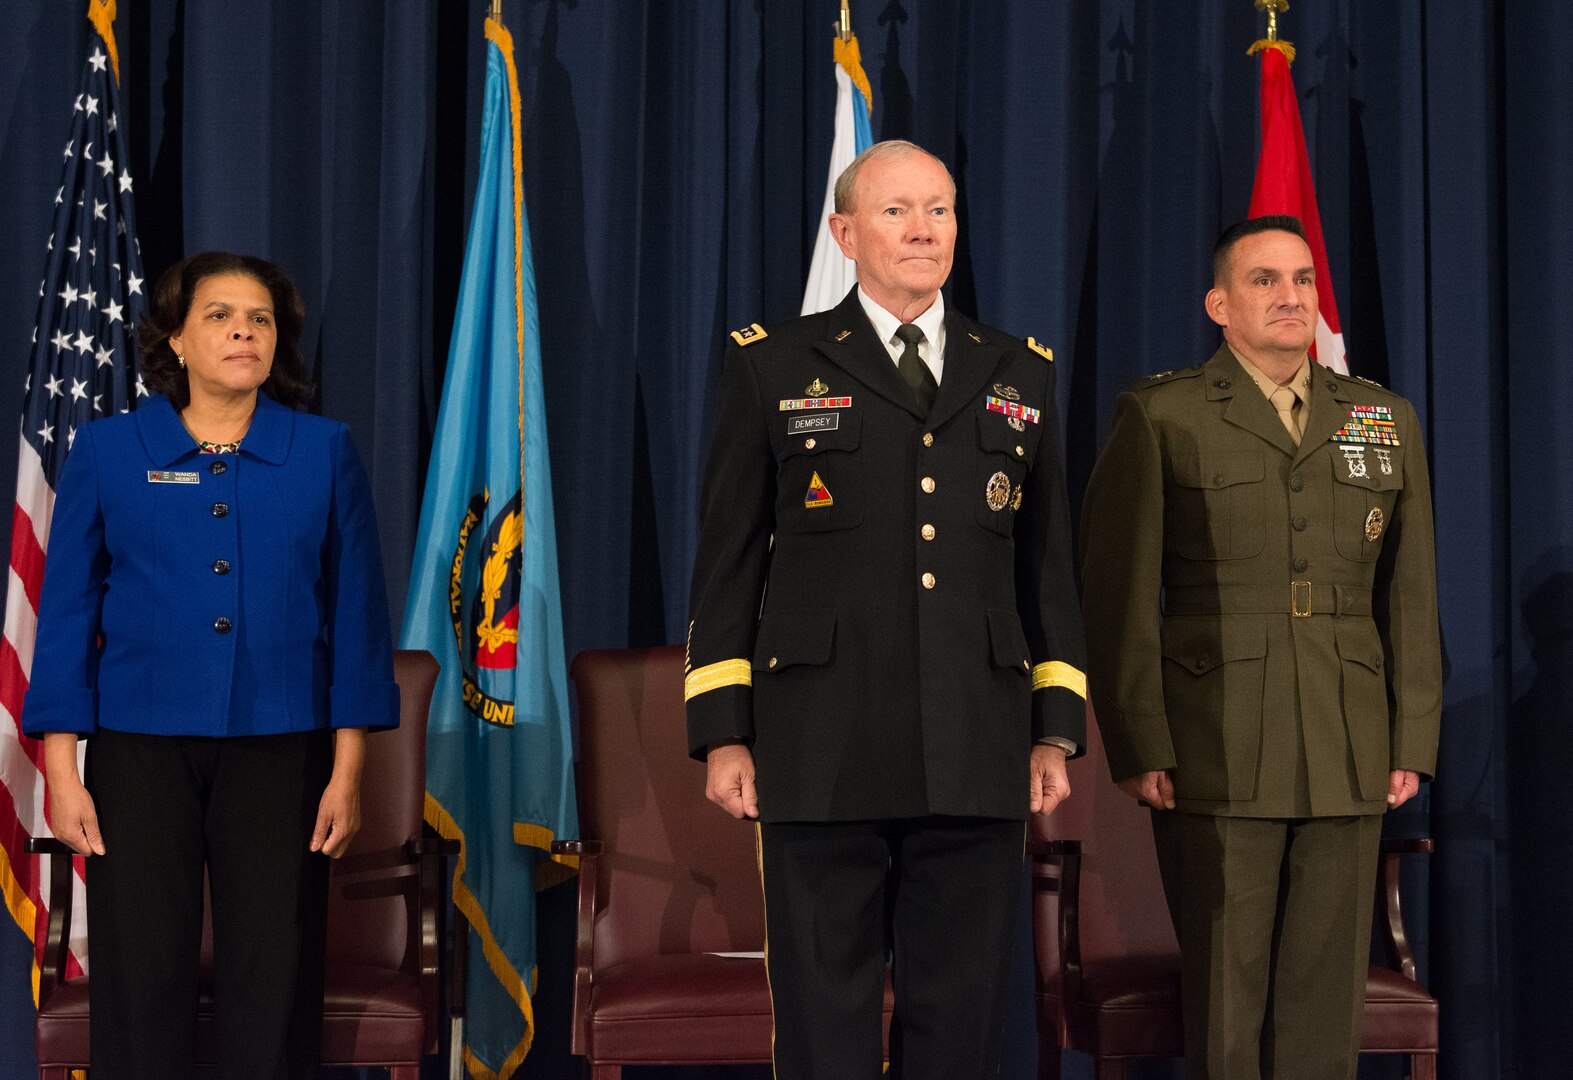 On November 18, 2014, Major General Frederick M. Padilla, USMC, became the President of the National Defense University in a ceremony in Abraham Lincoln Hall at Fort McNair in Washington, DC. Maj Gen Padilla relieved Senior Vice President AMB Wanda Nesbitt from her position as Interim President of NDU. Chairman of the Joint Chiefs of Staff General Martin E. Dempsey, USA, presided over the ceremony and gave remarks.